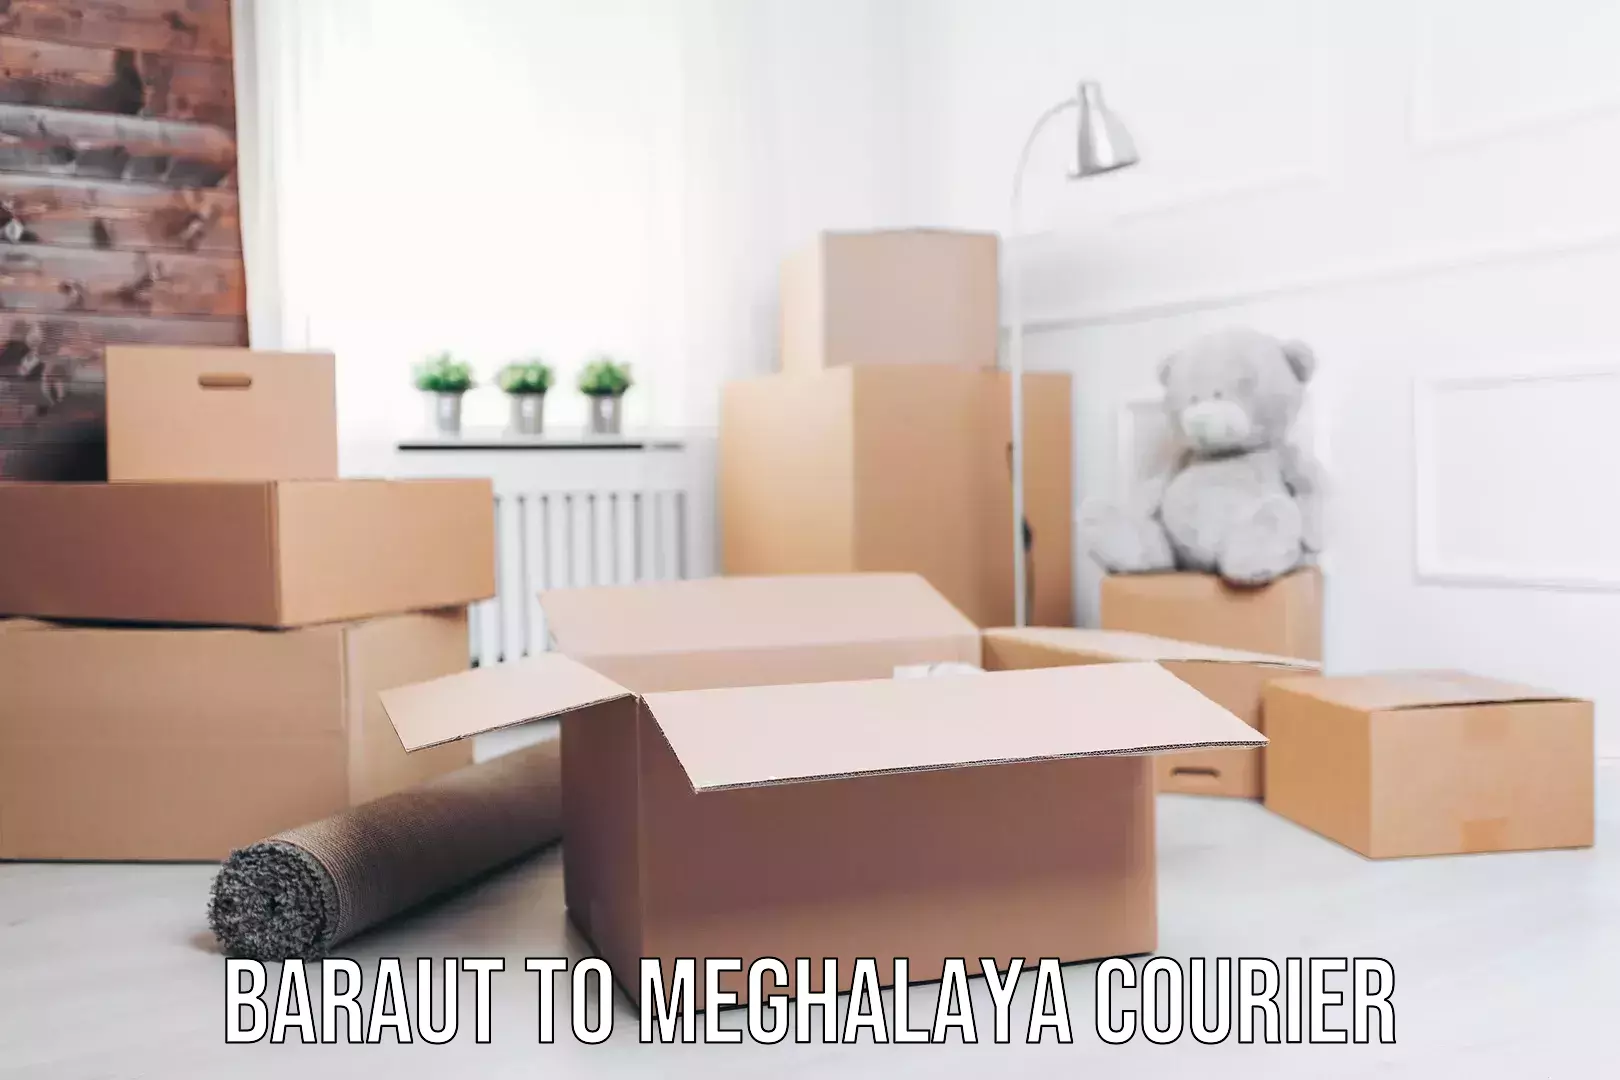 Local courier options in Baraut to Meghalaya